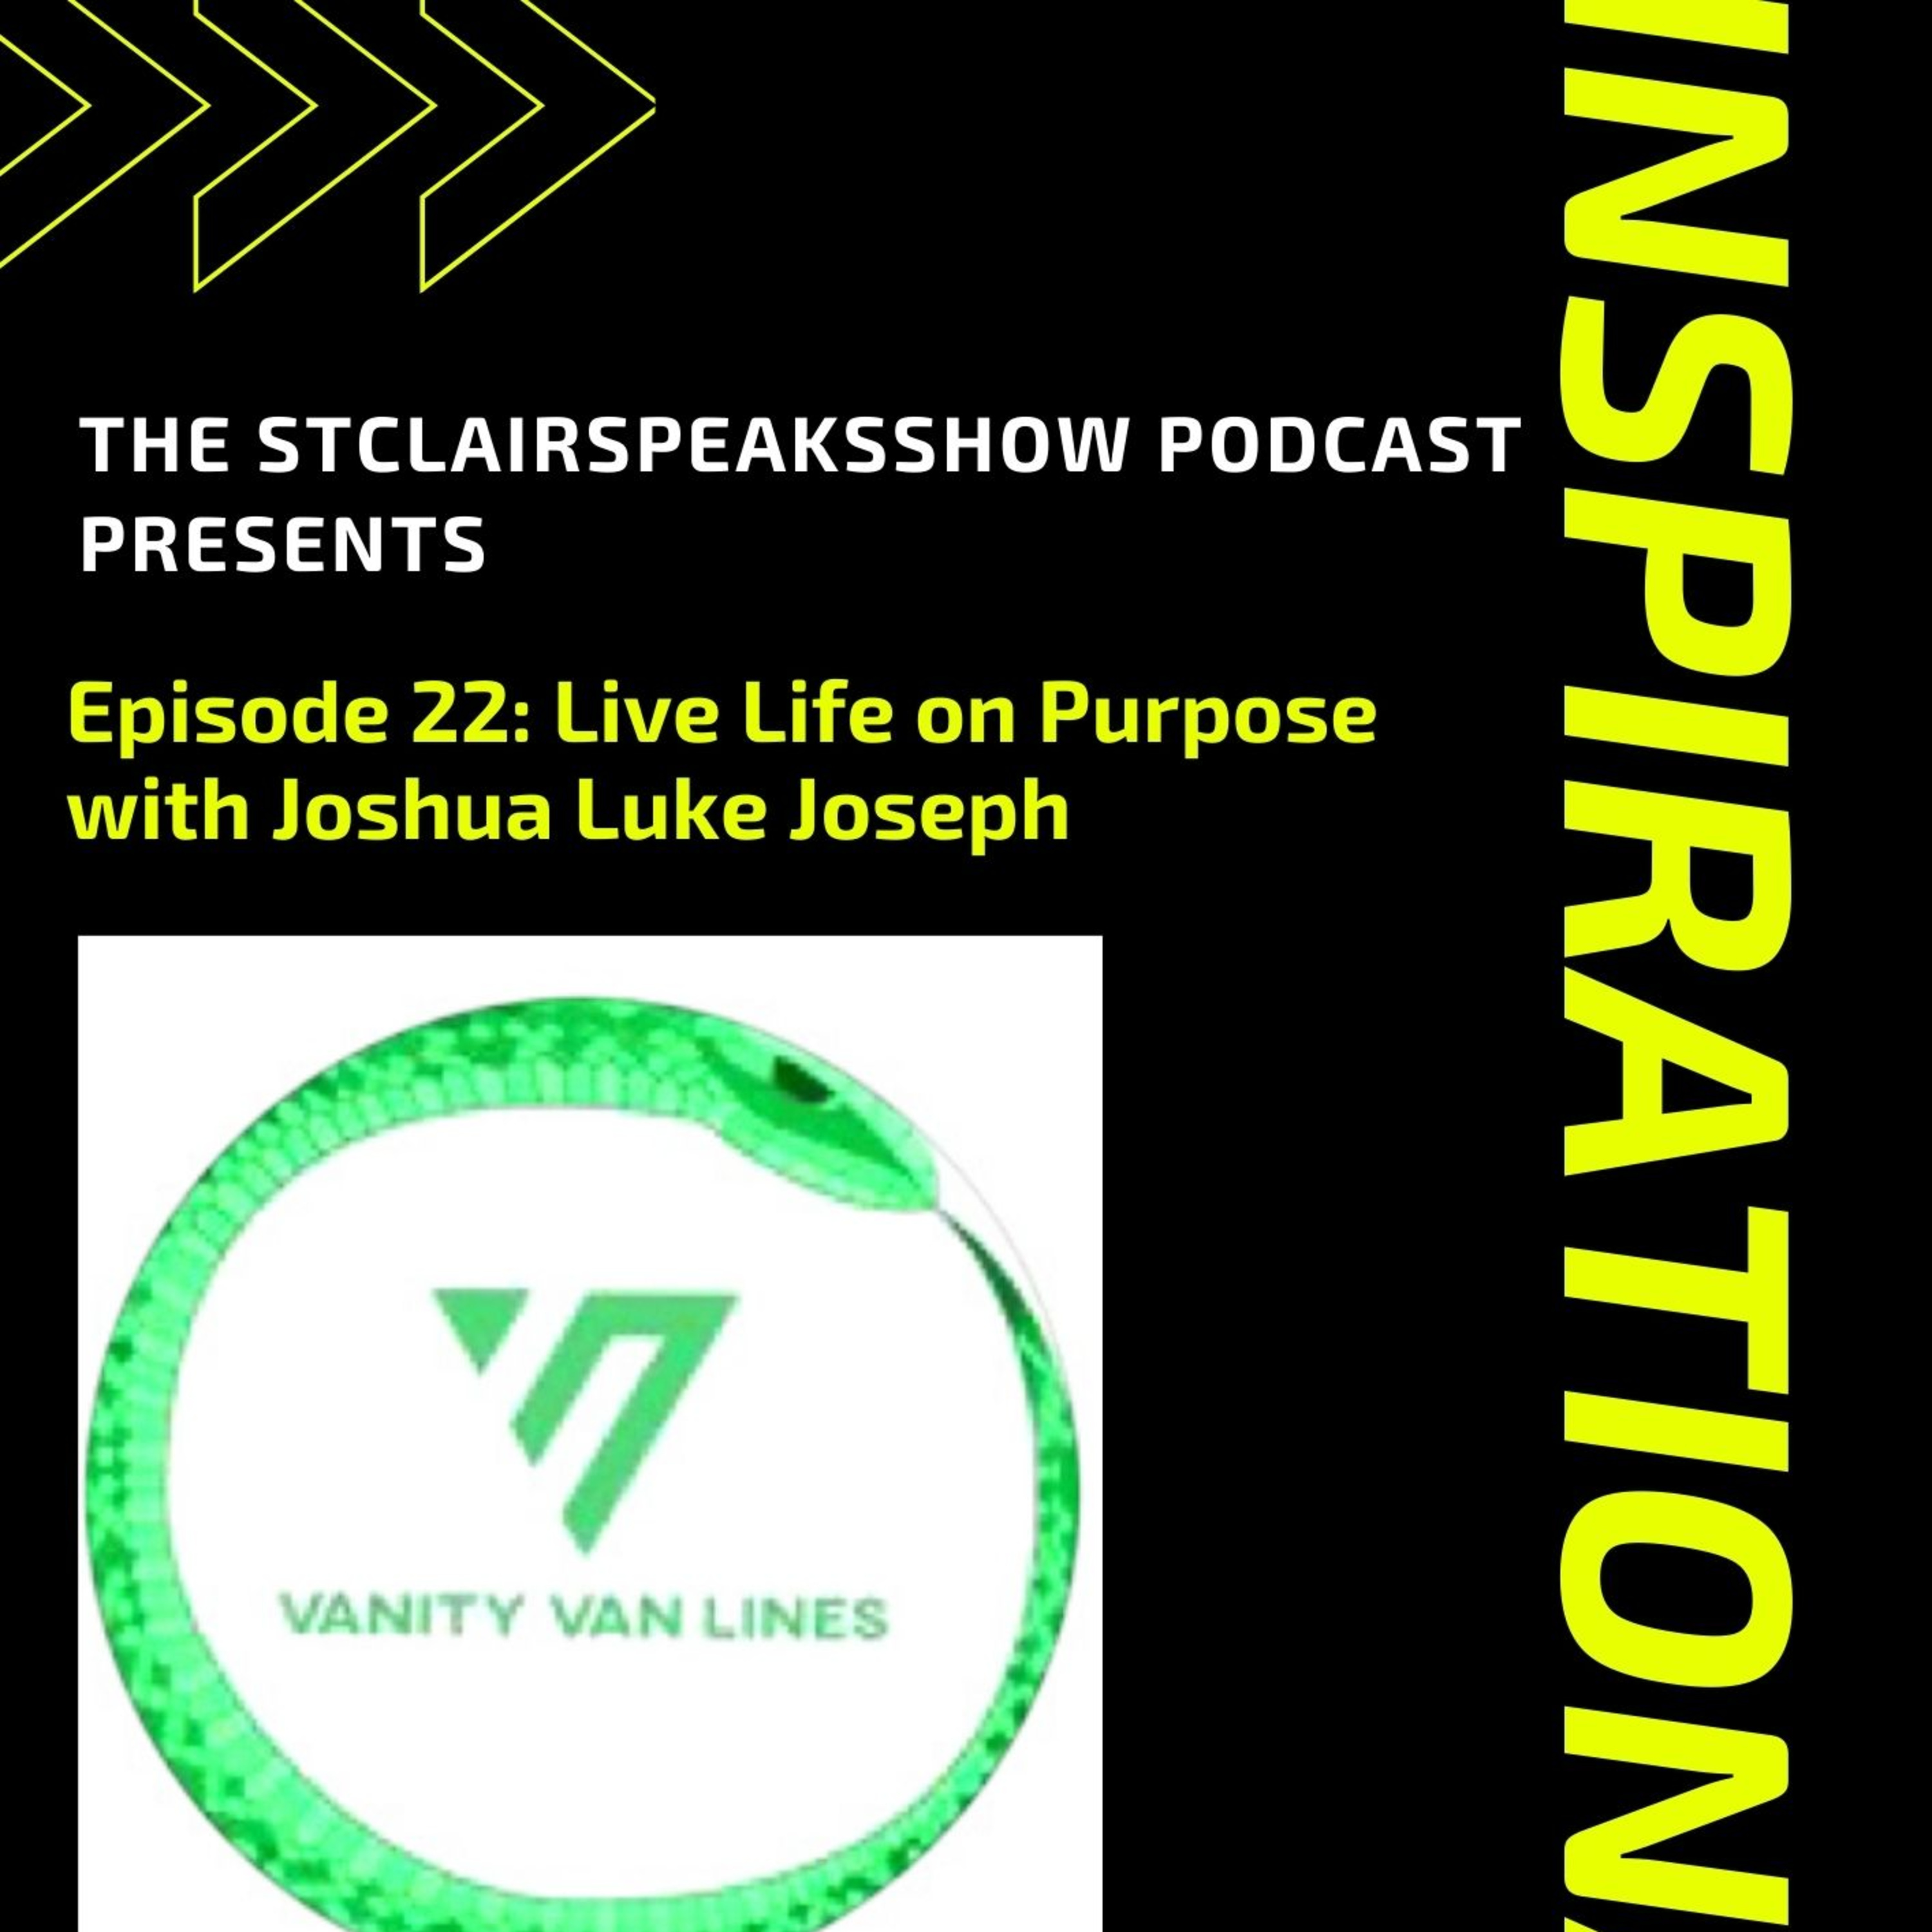 The StclairSpeaksShow Podcast Featuring Joshua Joseph CEO & Founder of Vanity Van Lines